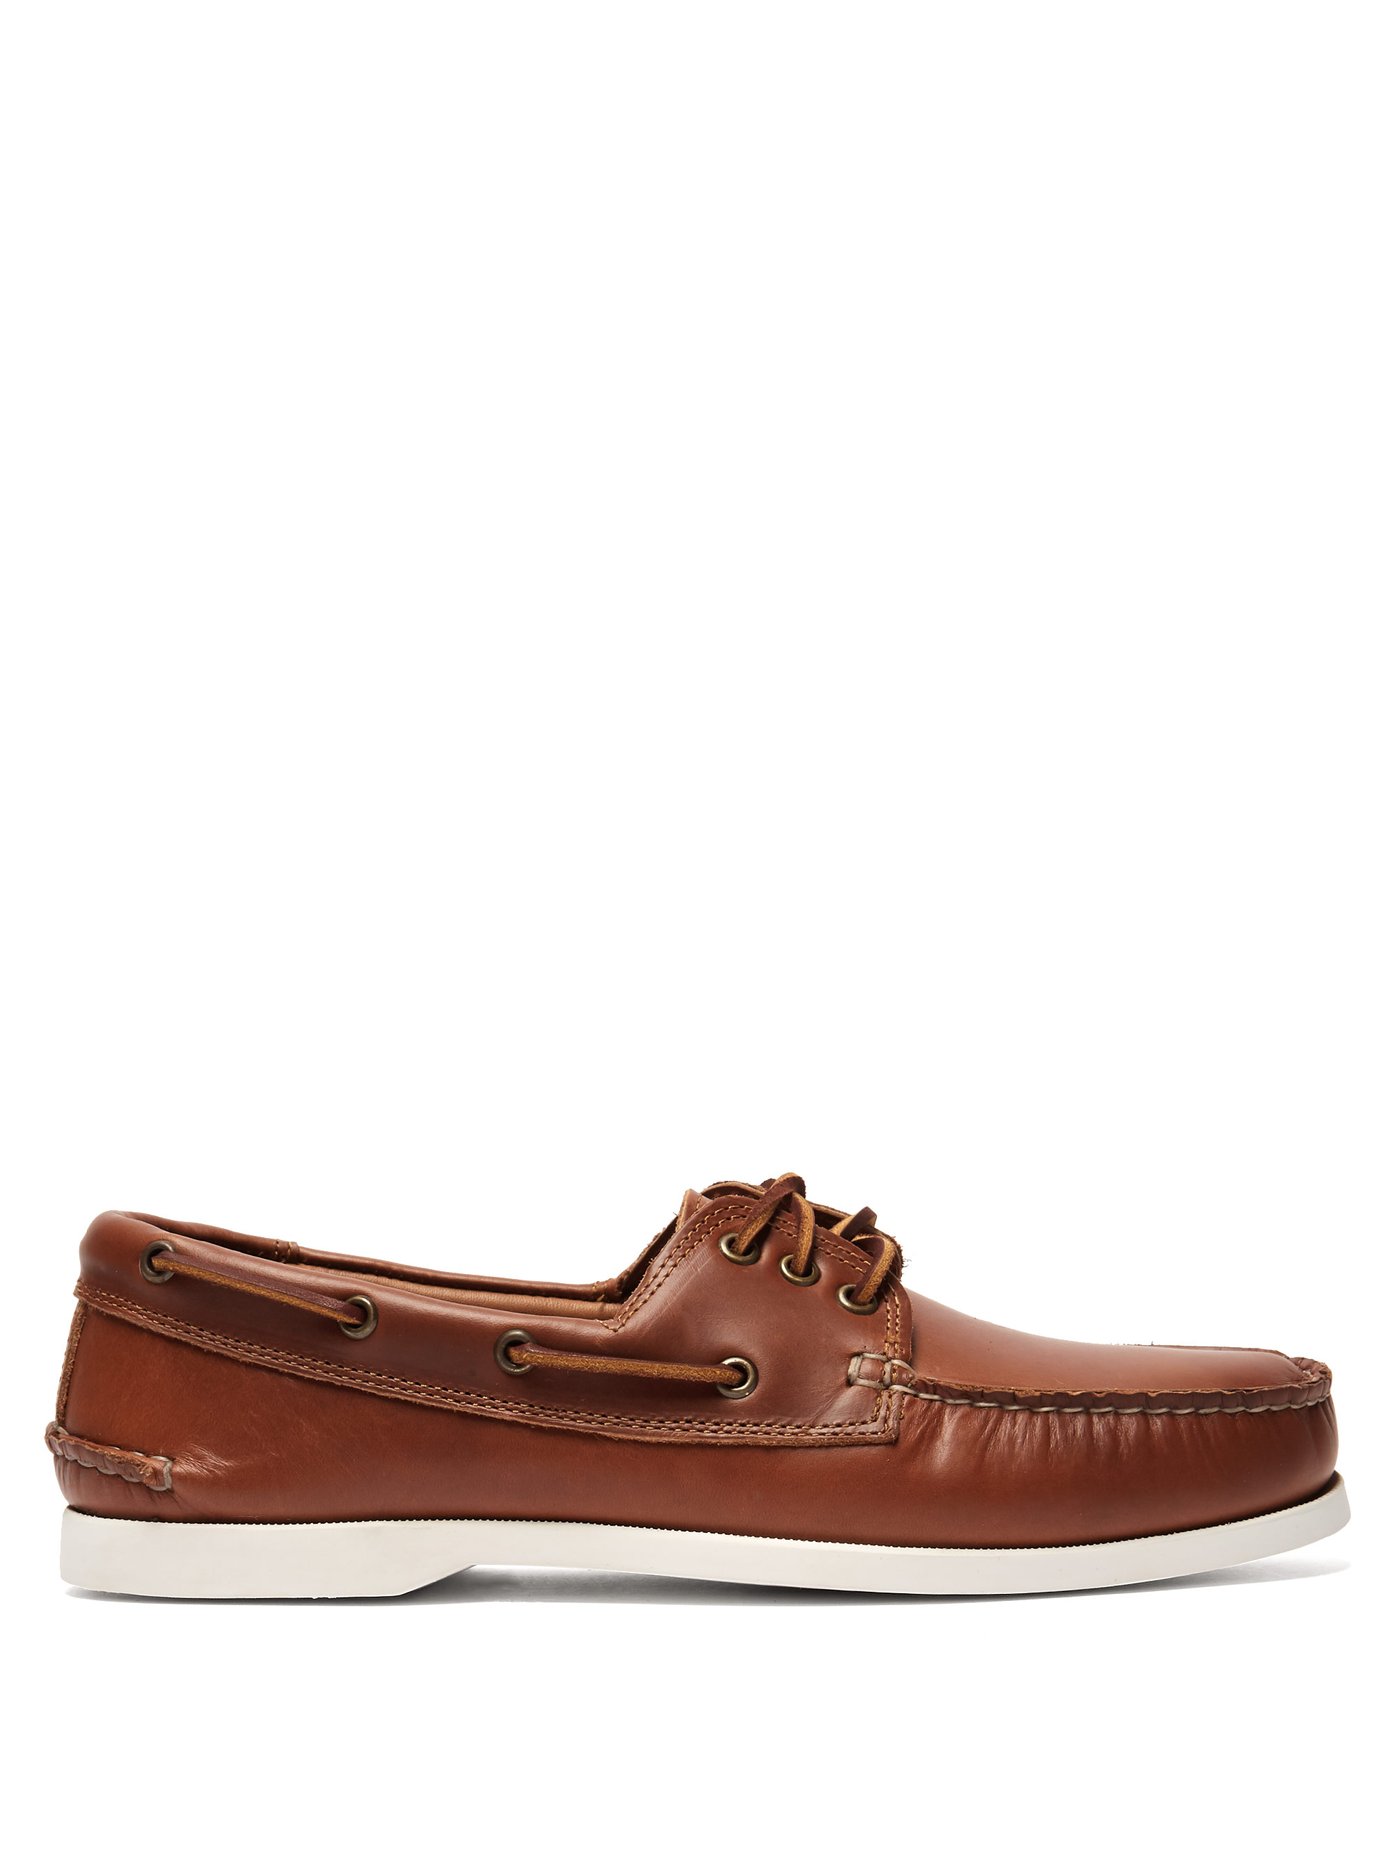 Downeast leather boat shoes | Quoddy 